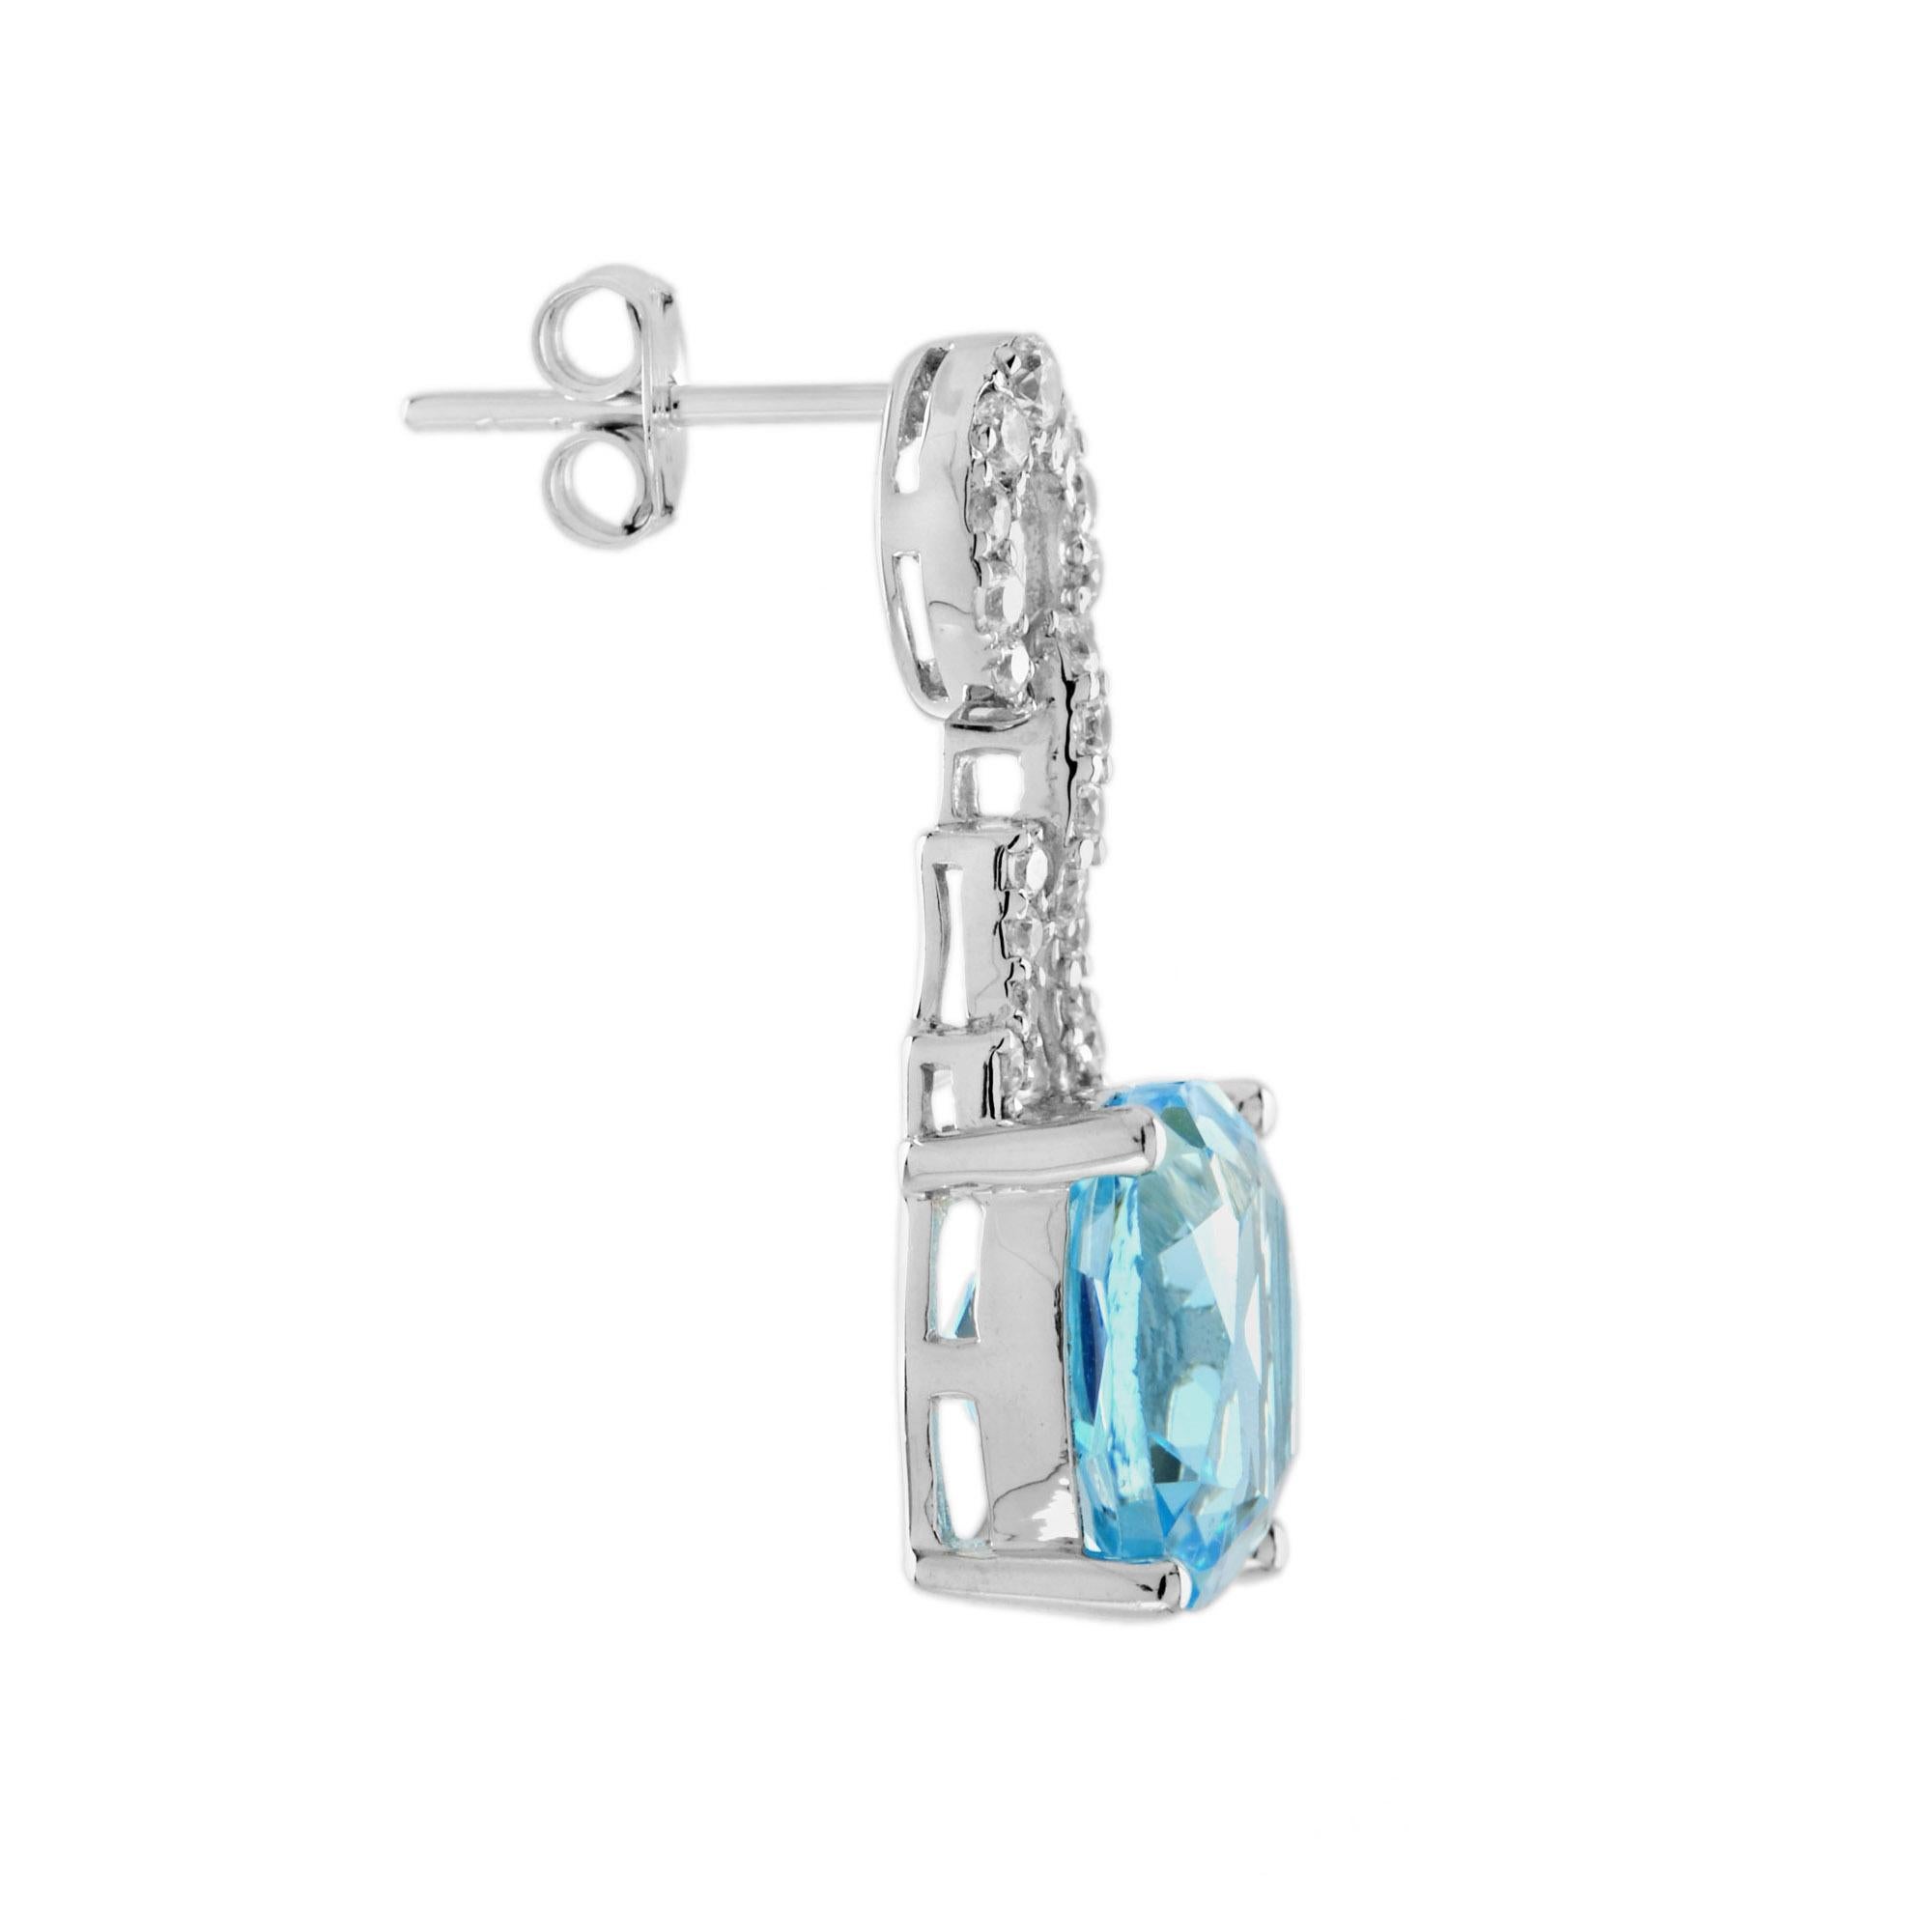 These graceful drop earrings are mounted in white gold. Each of these outstanding drop earrings feature a cushion cut sky blue topaz gemstone and diamonds. Pair them with your favorite casual, professional or dressy outfit and look